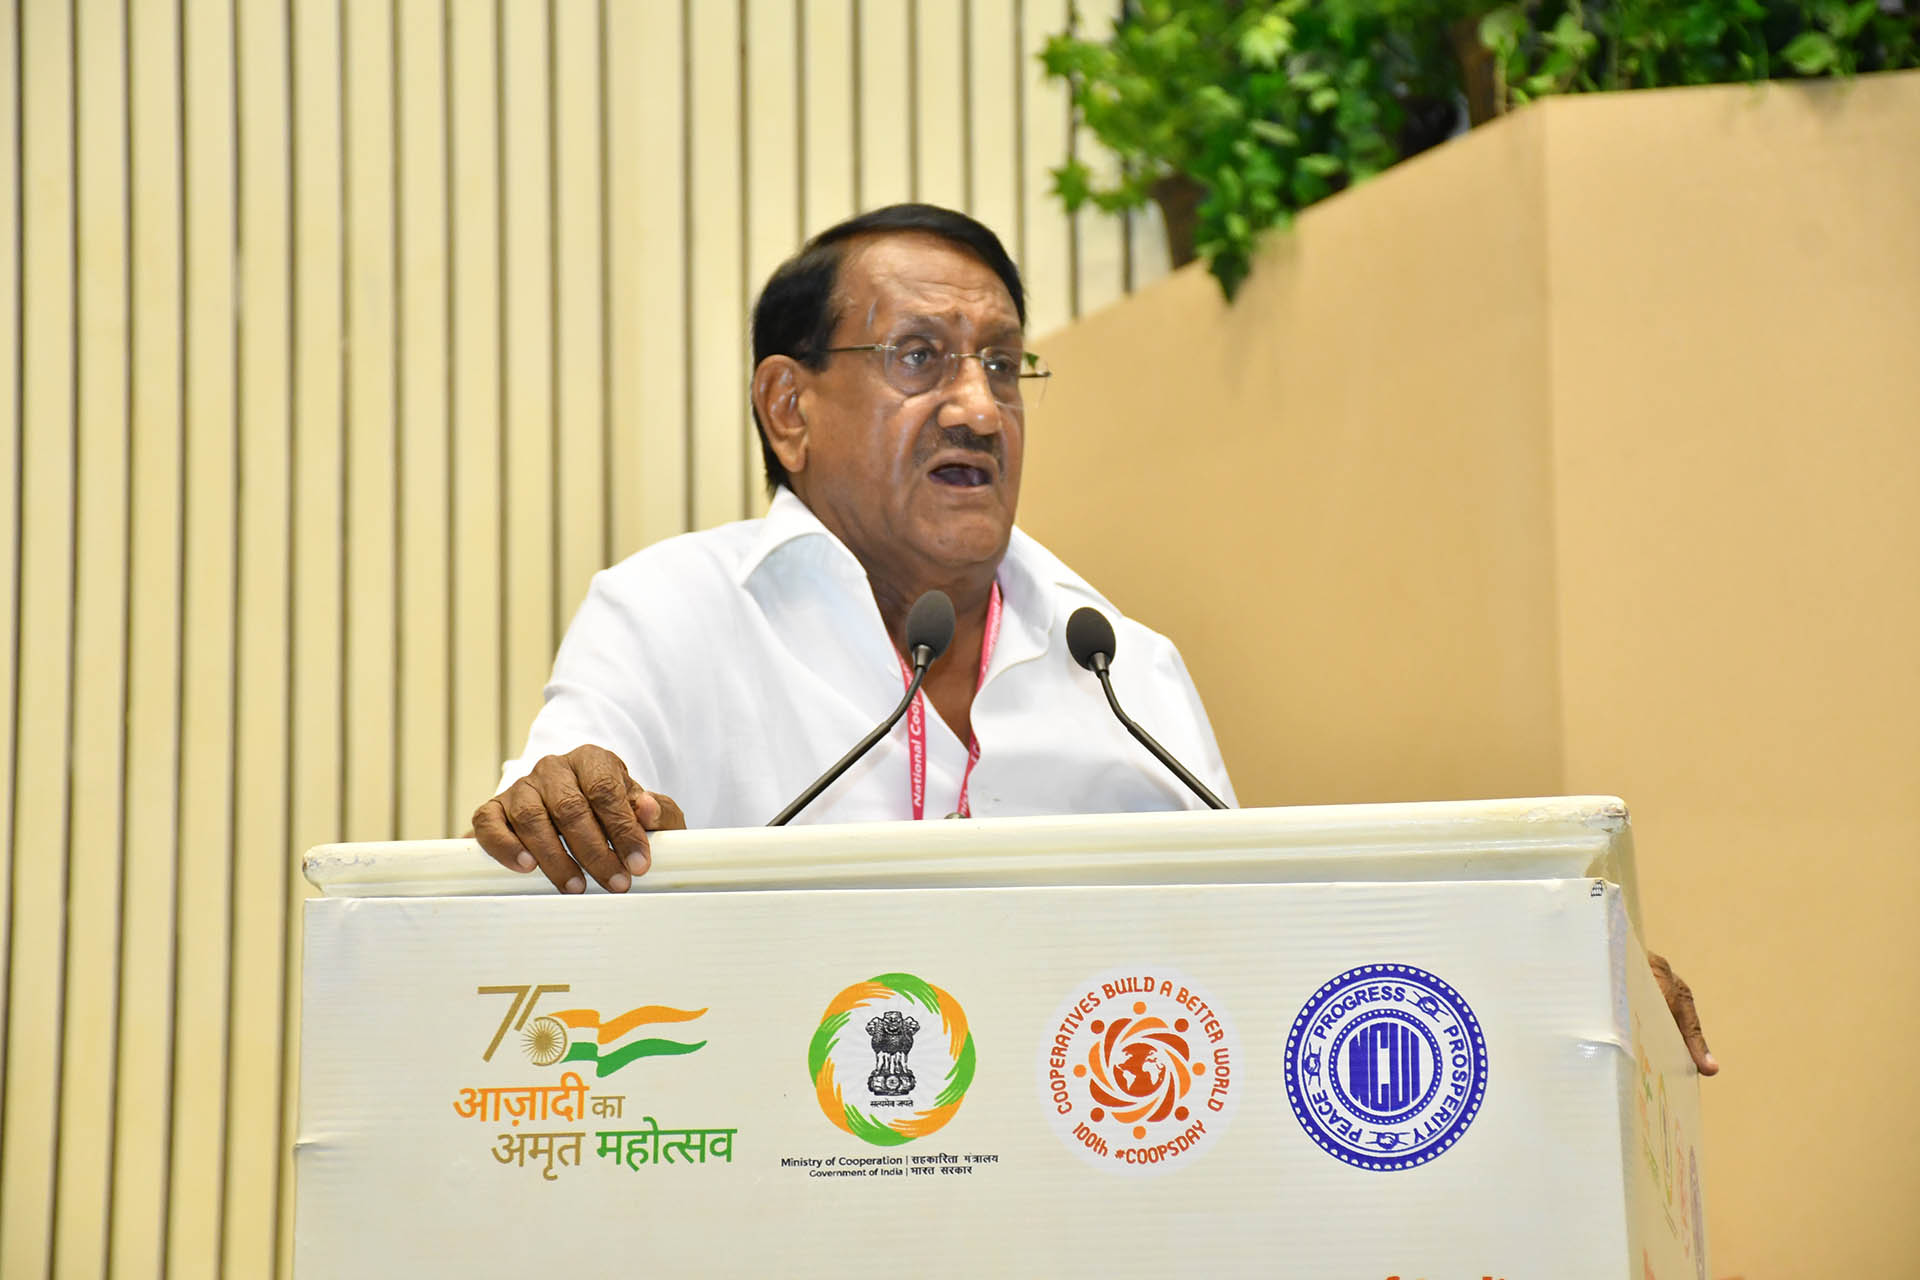 Address by Dr.Bijender Singh, Chairman, NAFED and Vice President, NCUI on the 100th International Day of Cooperatives